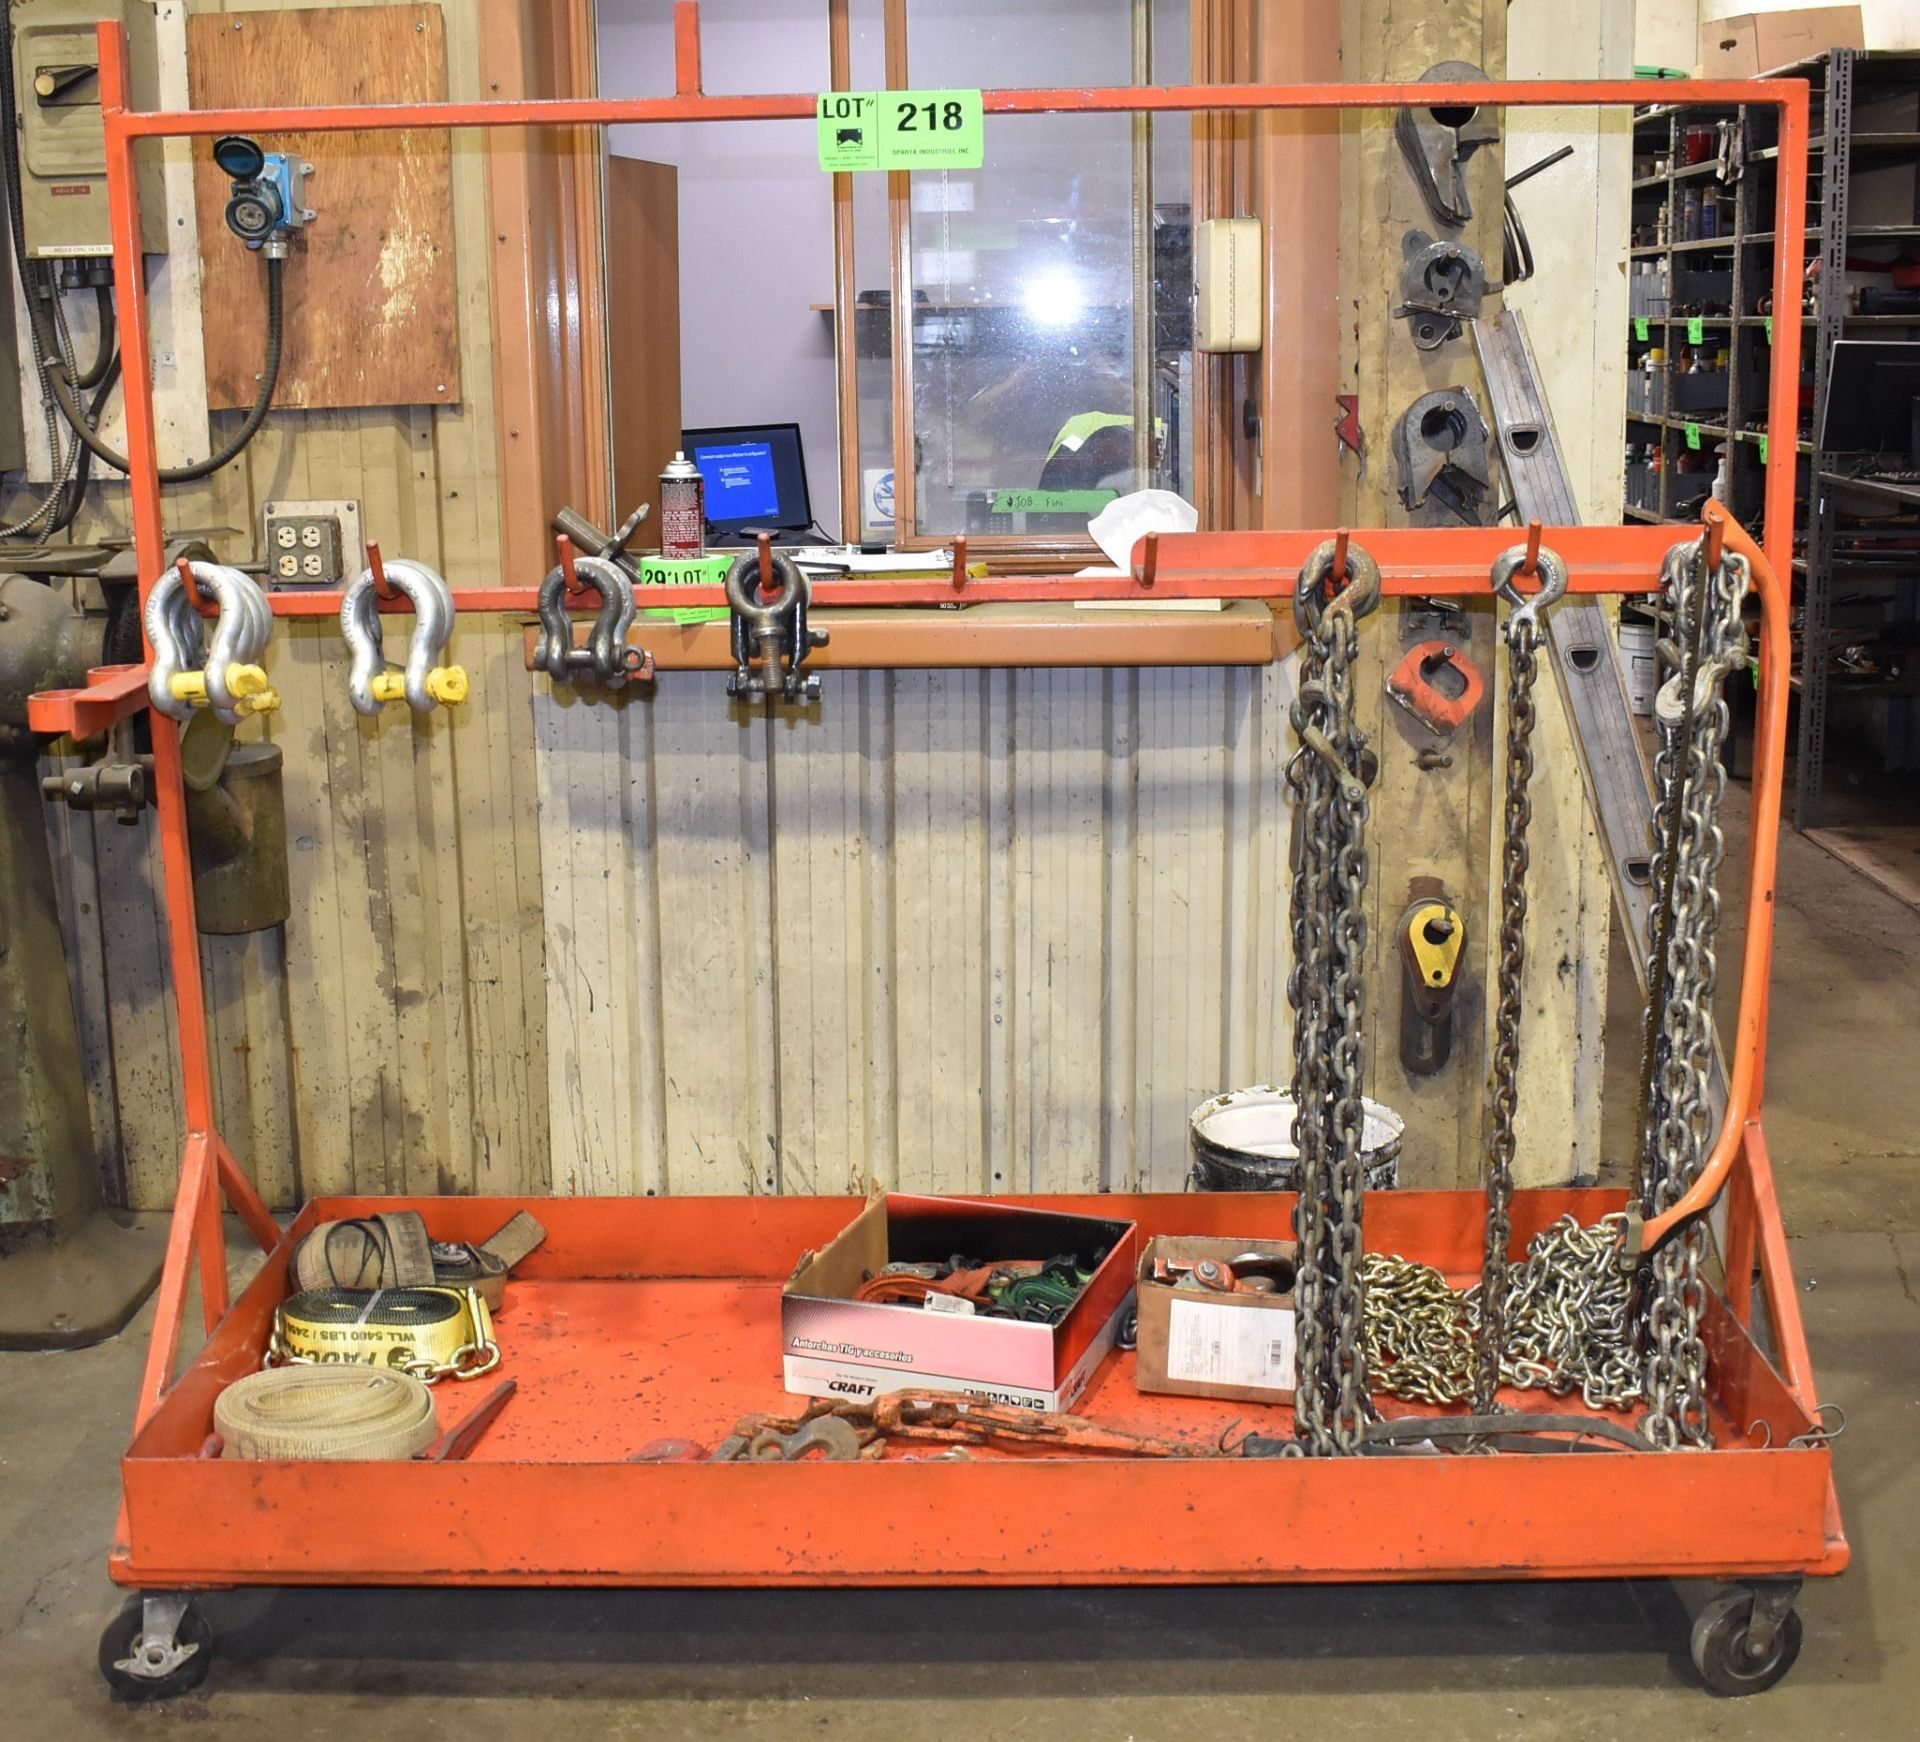 LOT/ ROLLING RACK WITH RIGGING SUPPLIES CONSISTING OF SHACKLES, EYE BOLTS, CHAIN AND STRAPS